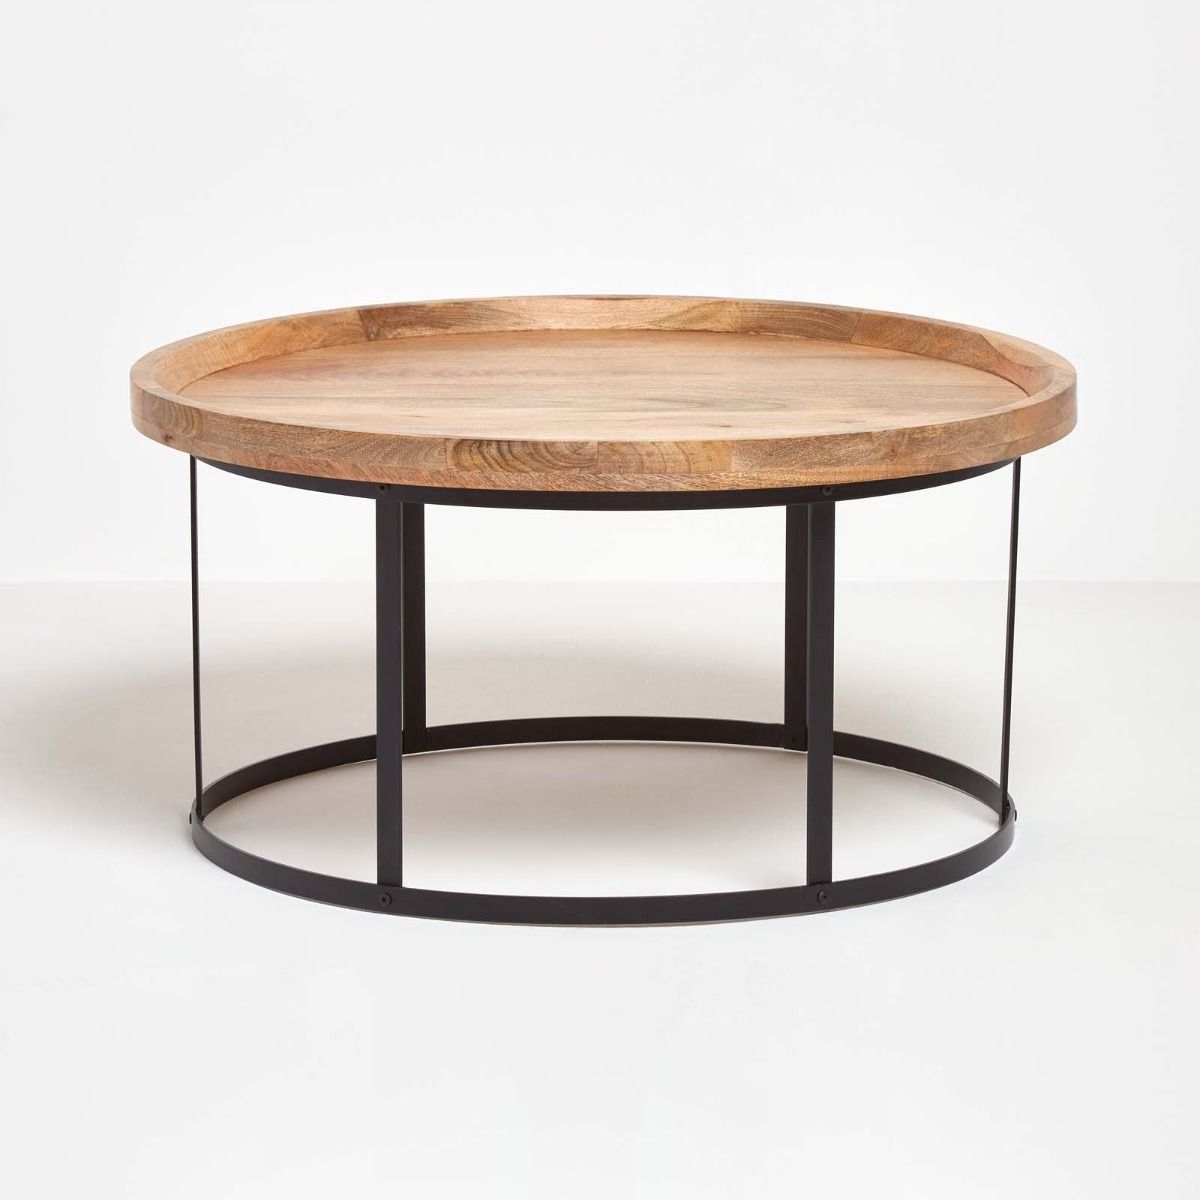 2020 Round Industrial Coffee Tables Inside Industrial Round Coffee Table With Natural Wood Top And Steel Frame (View 16 of 20)